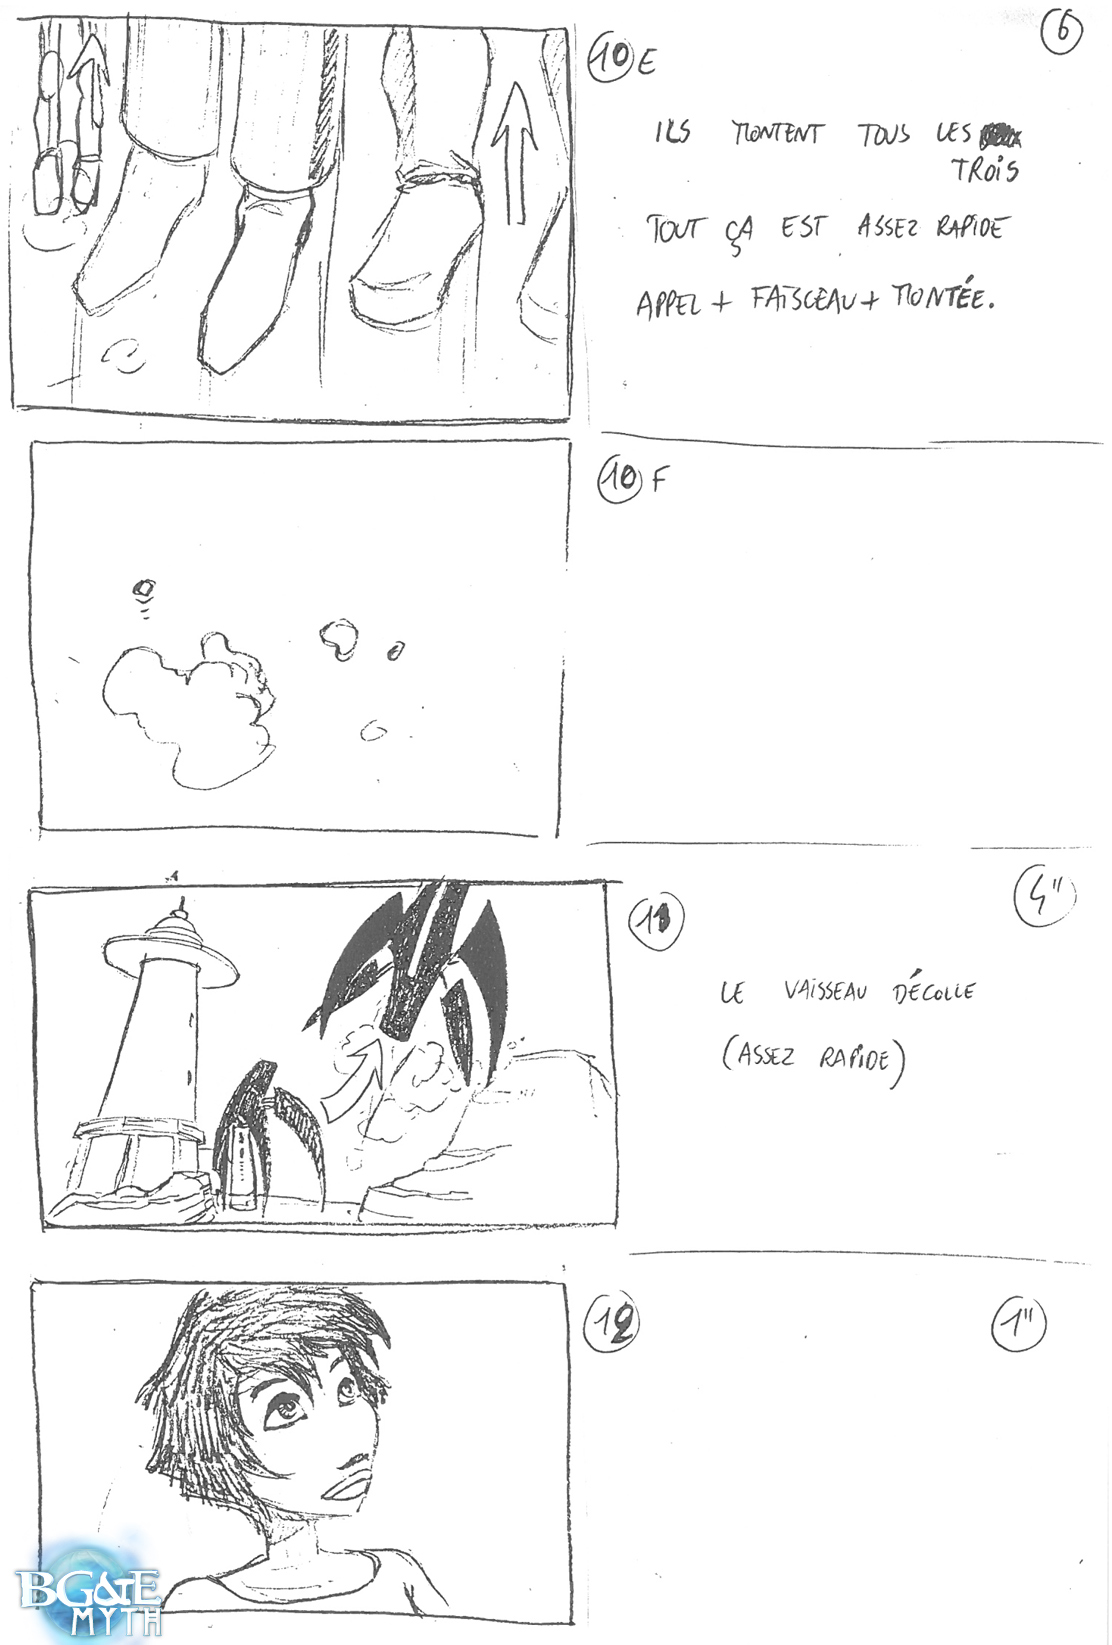 Storyboard : Les sections Alpha débarquent ! - Page 6